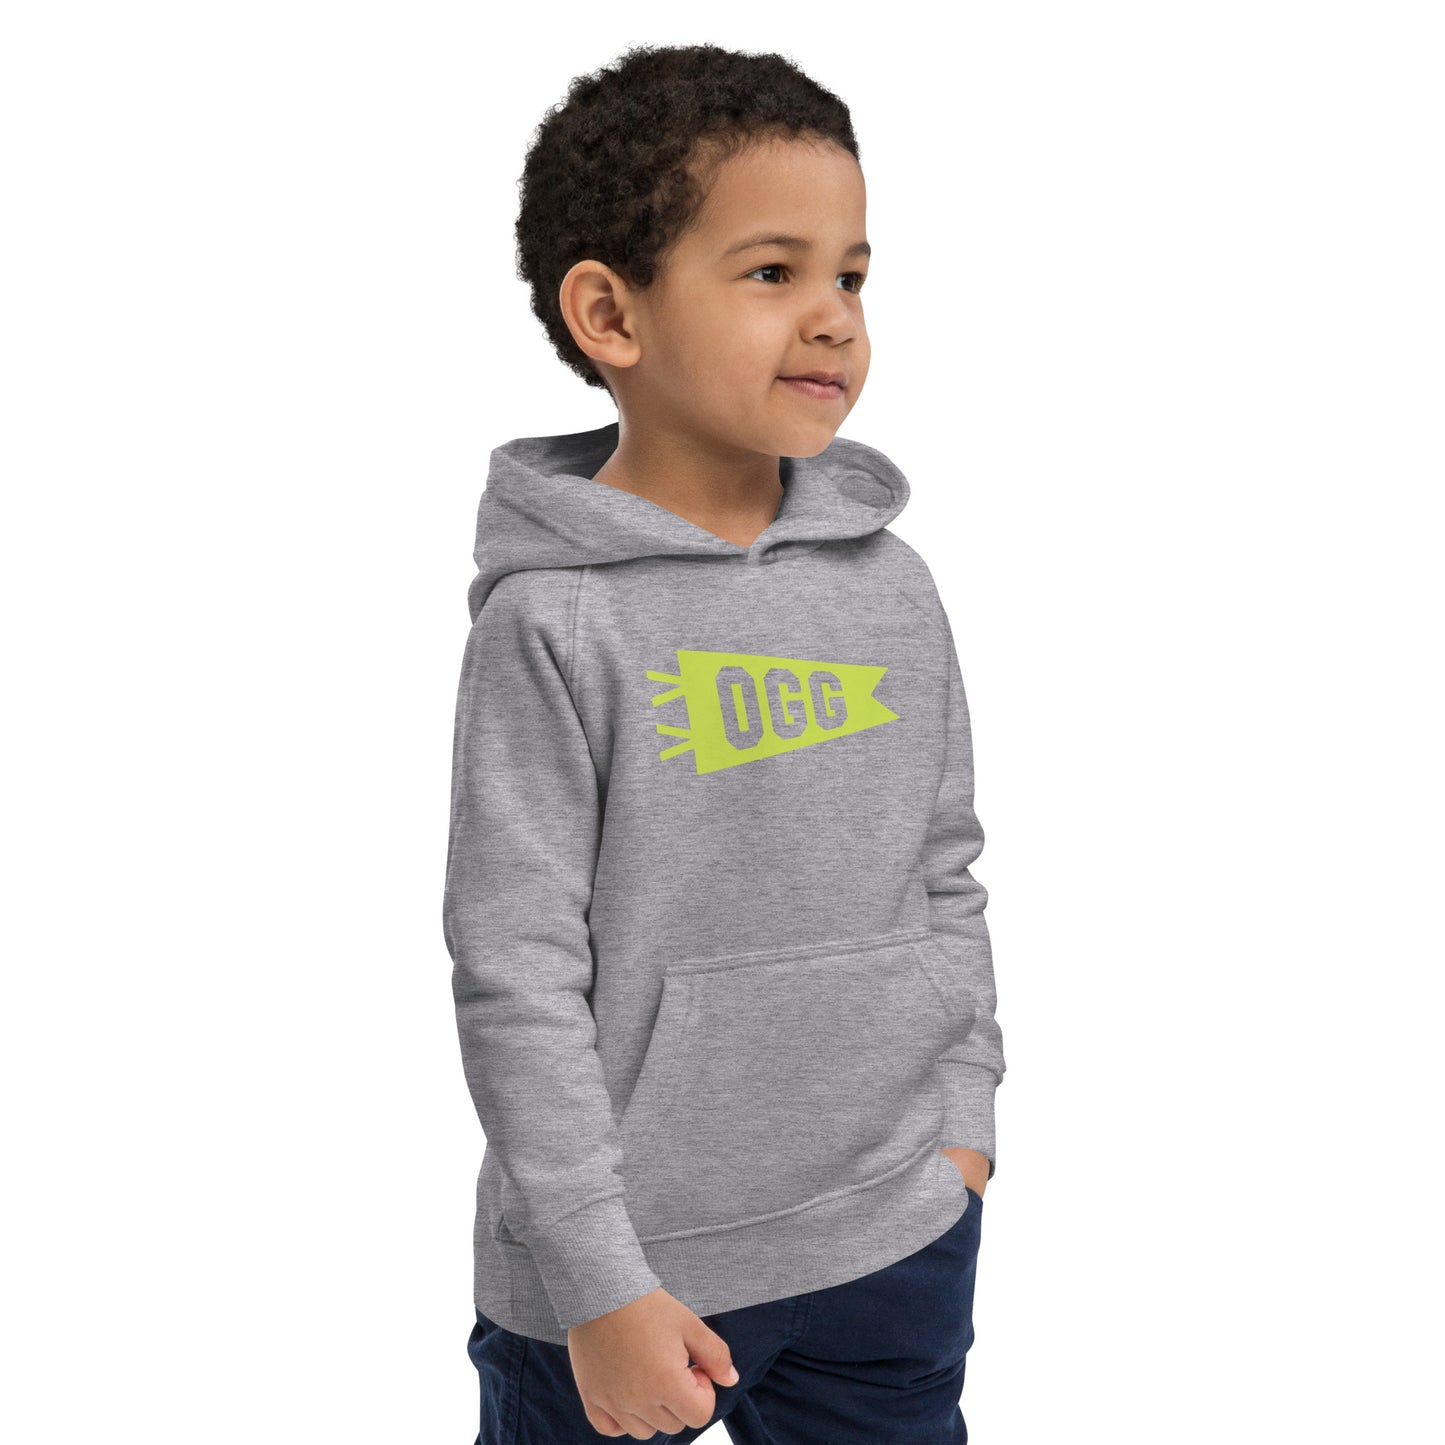 Kid's Sustainable Hoodie - Green Graphic • OGG Maui • YHM Designs - Image 13